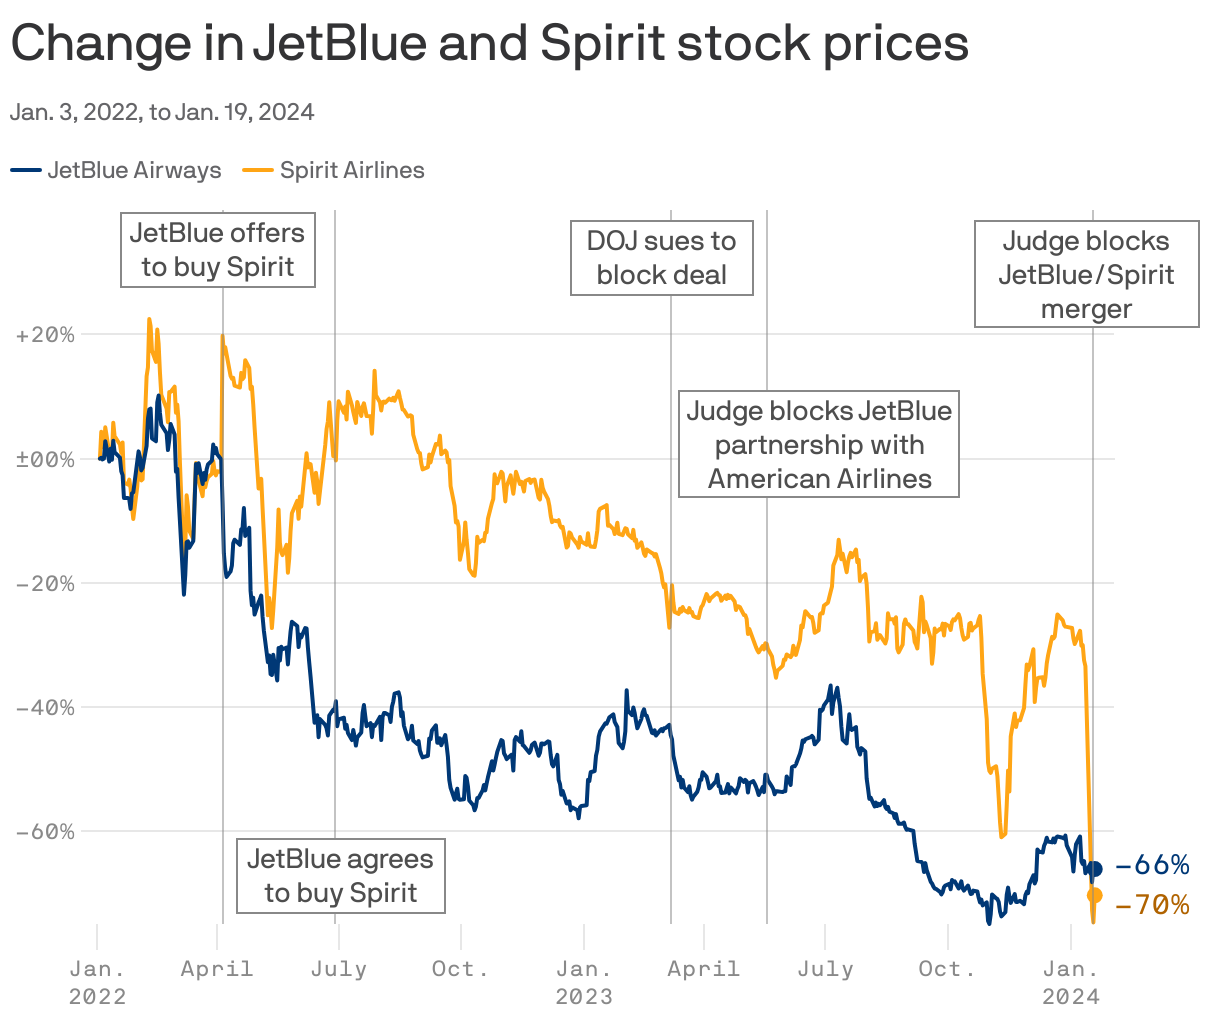 Change in JetBlue and Spirit stock prices